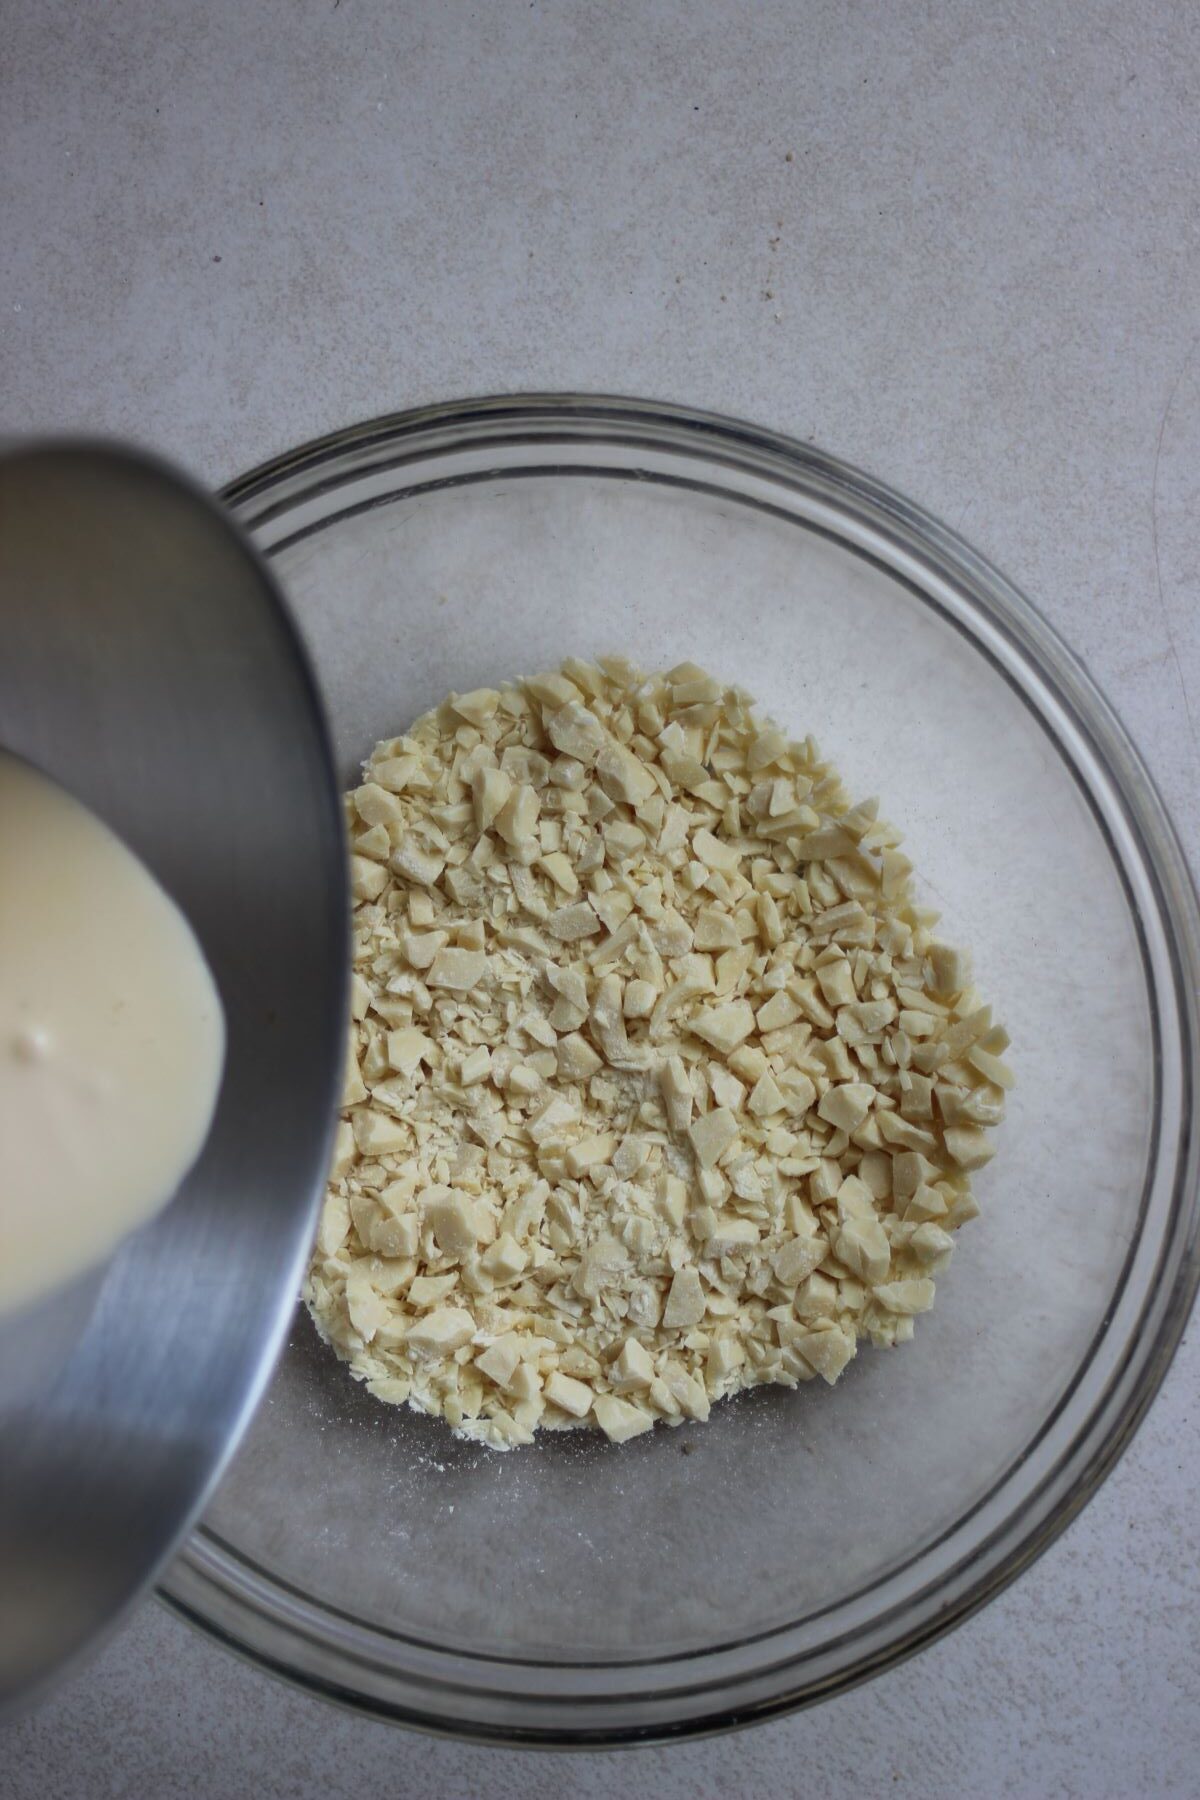 Saucepan with cream is about to be poured into a bowl with finely chopped white chocolate.